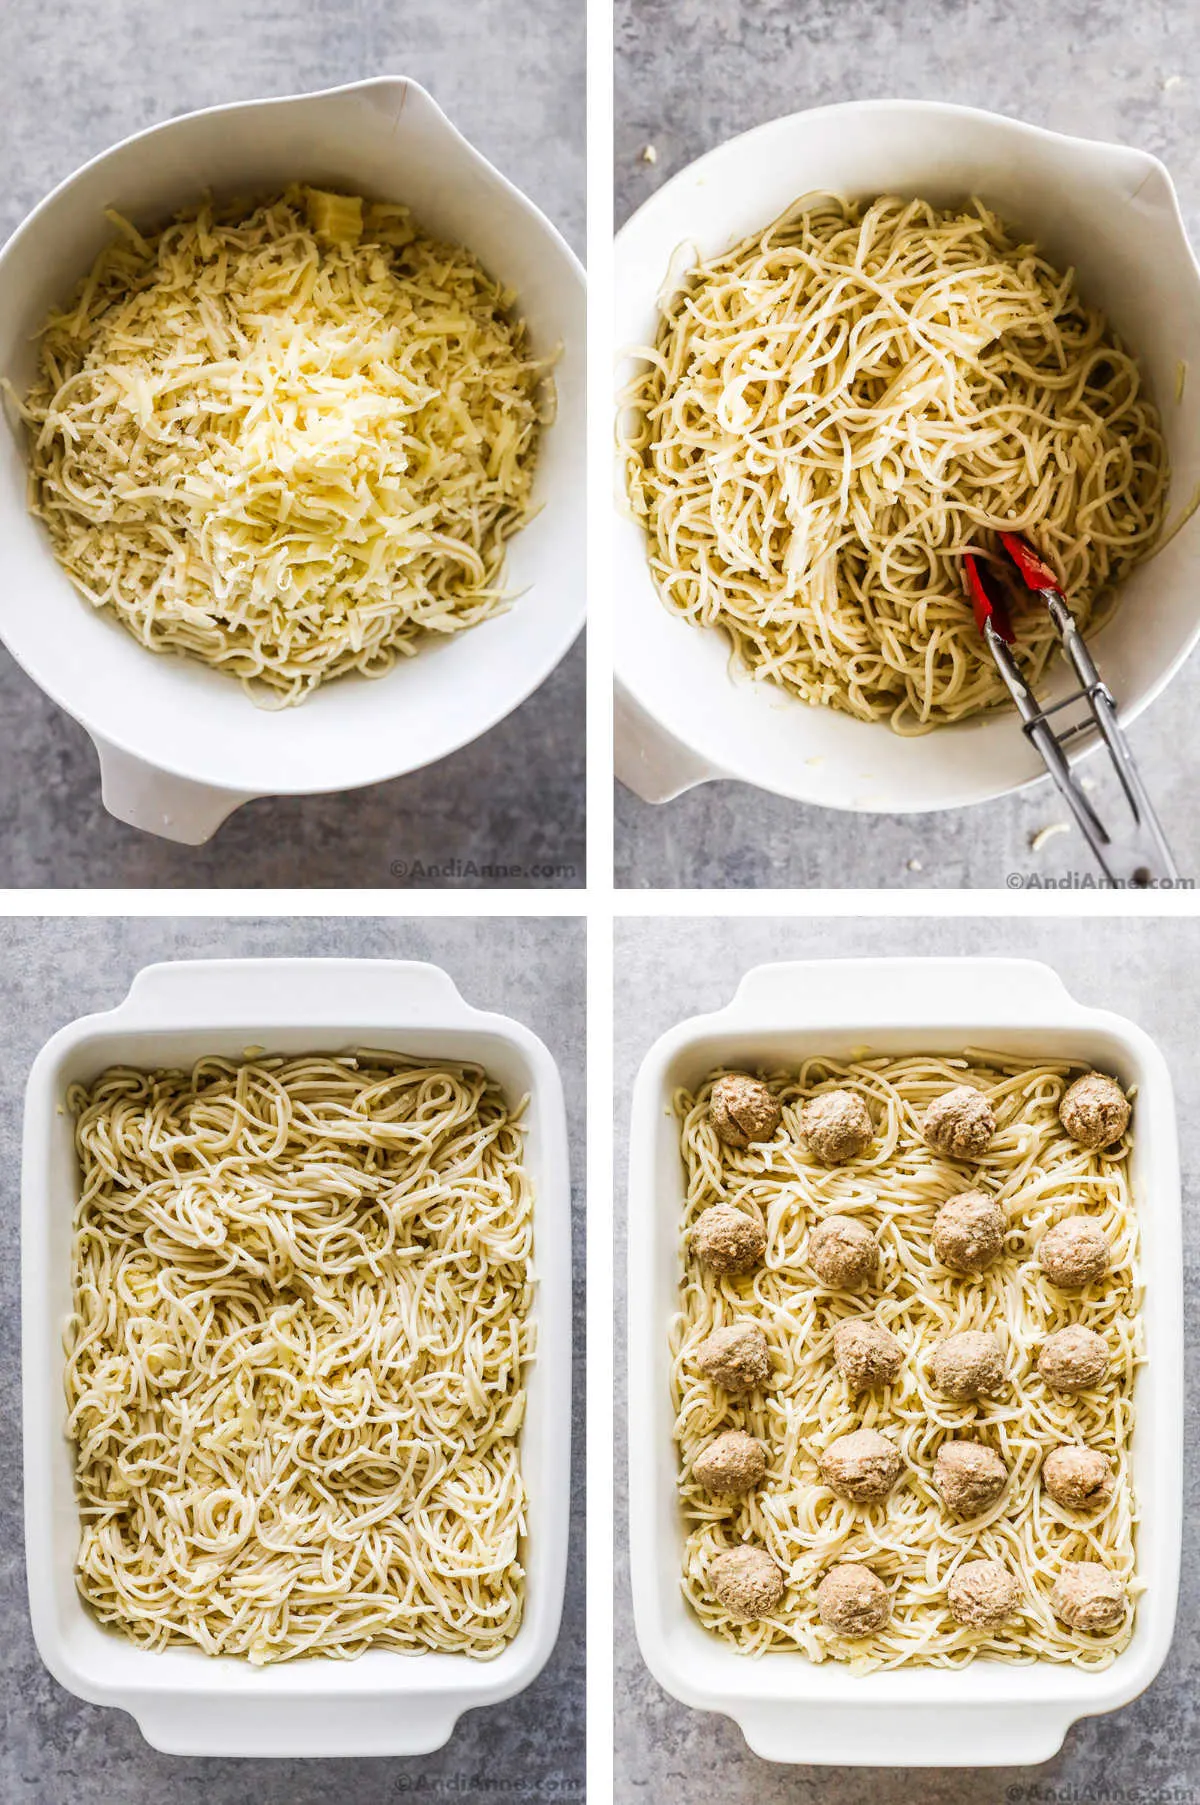 Four overhead images in one: 1. Spaghetti in white bowl with chees on top. 2. Spaghetti and cheese mixed in white bowl with tongs inside. 3. Mixed cheese and spaghetti in white casserole dish. 4. Meatballs added to casserole dish, on top of spaghetti. 